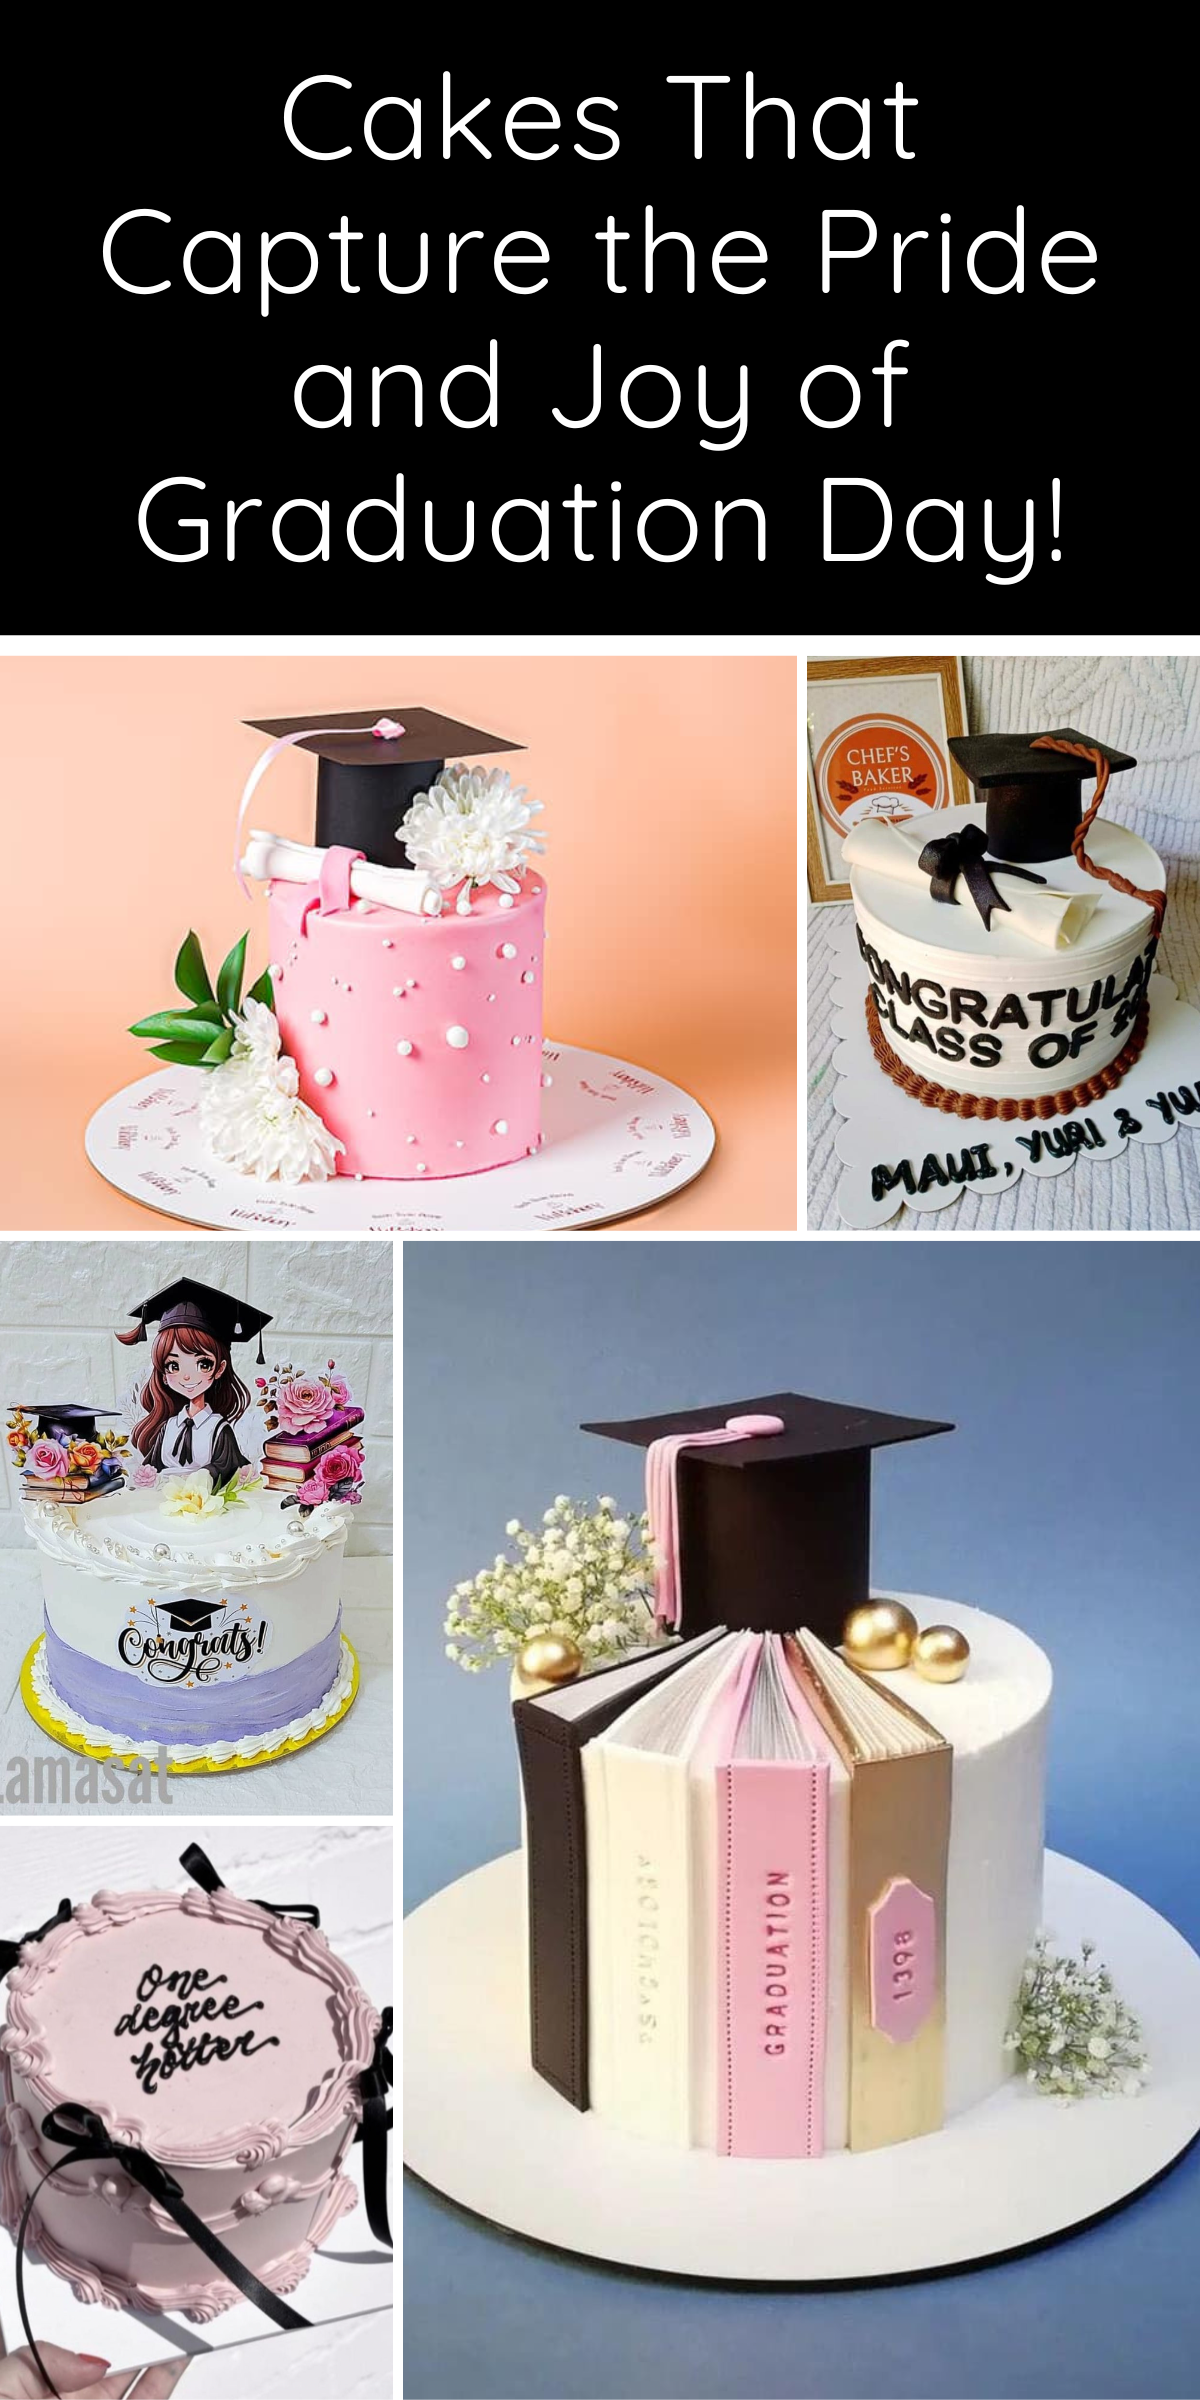 🎓🎉 🎓🎉 Find inspiration for graduation cakes that honor the past and look forward to the bright future ahead.